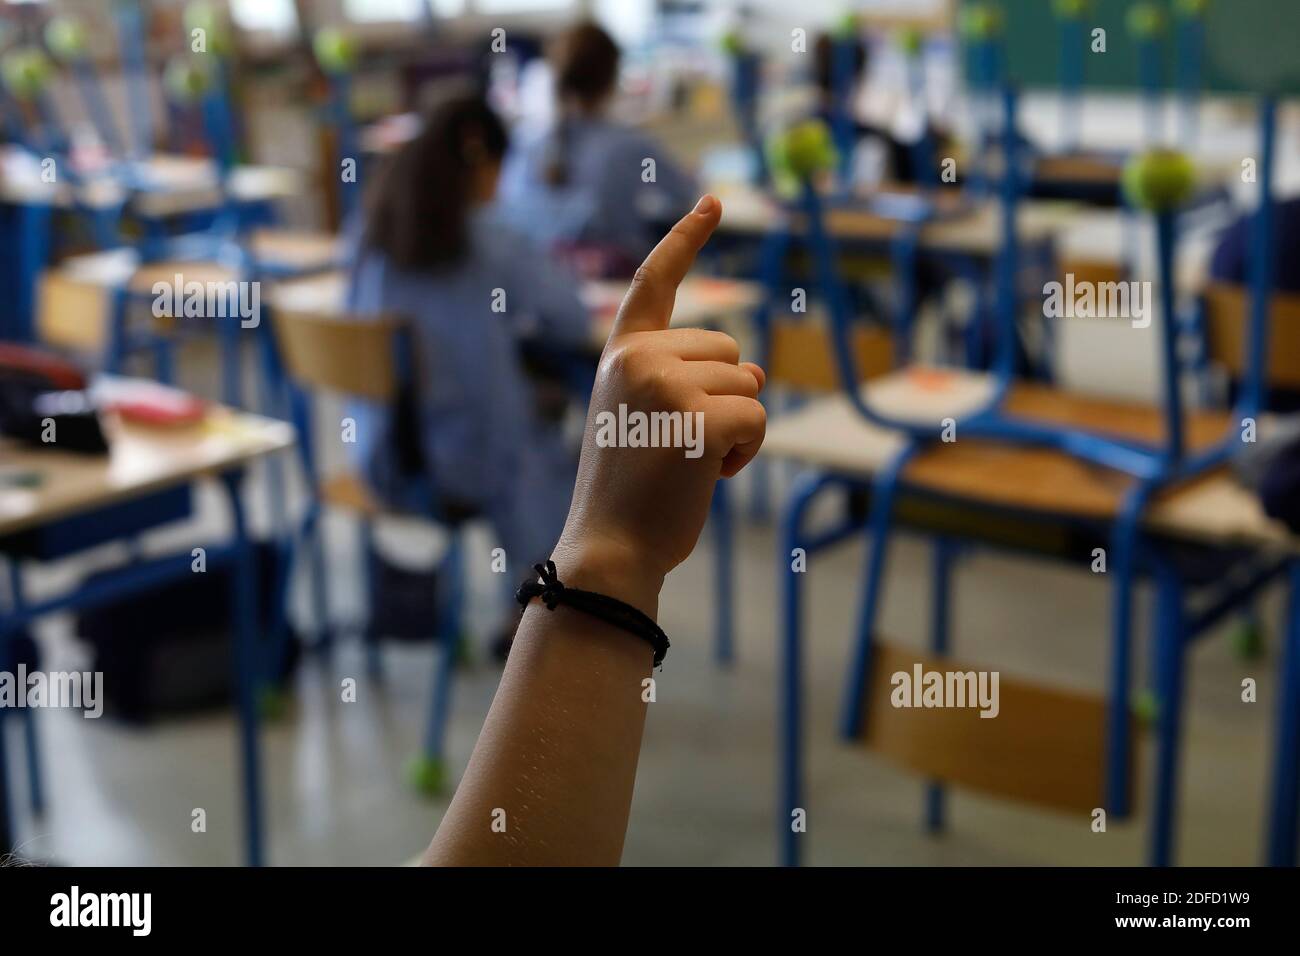 Primary school after lockdown in montrouge, france Stock Photo